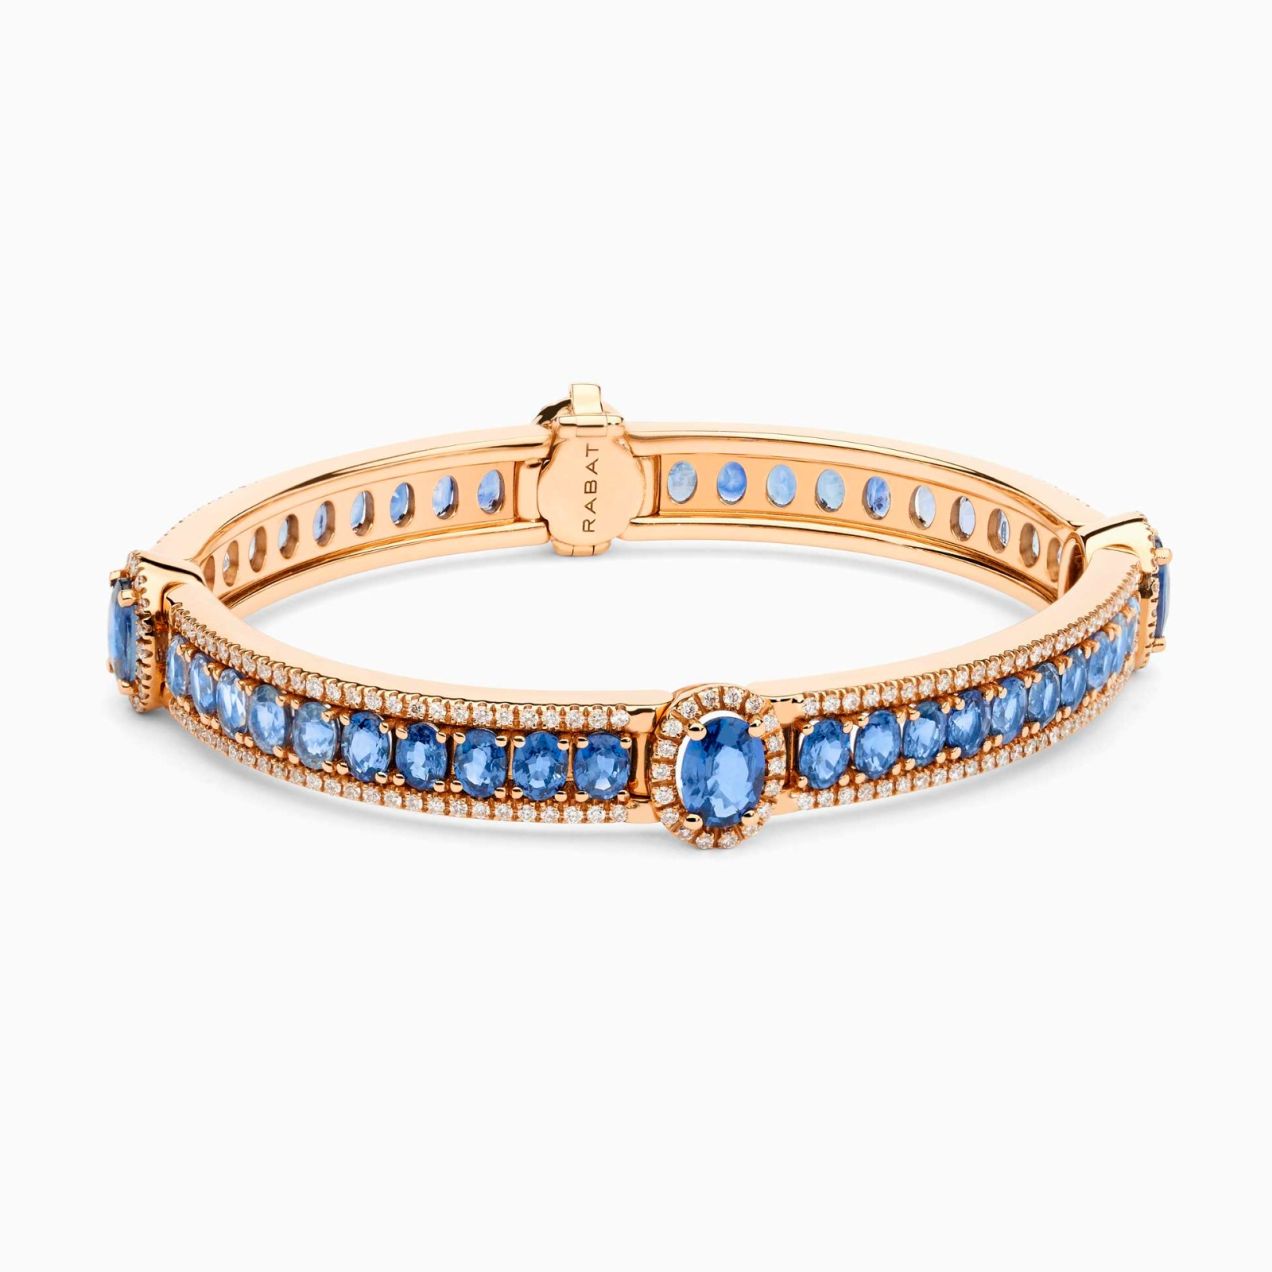 Rose gold bracelet with blue sapphires and diamonds